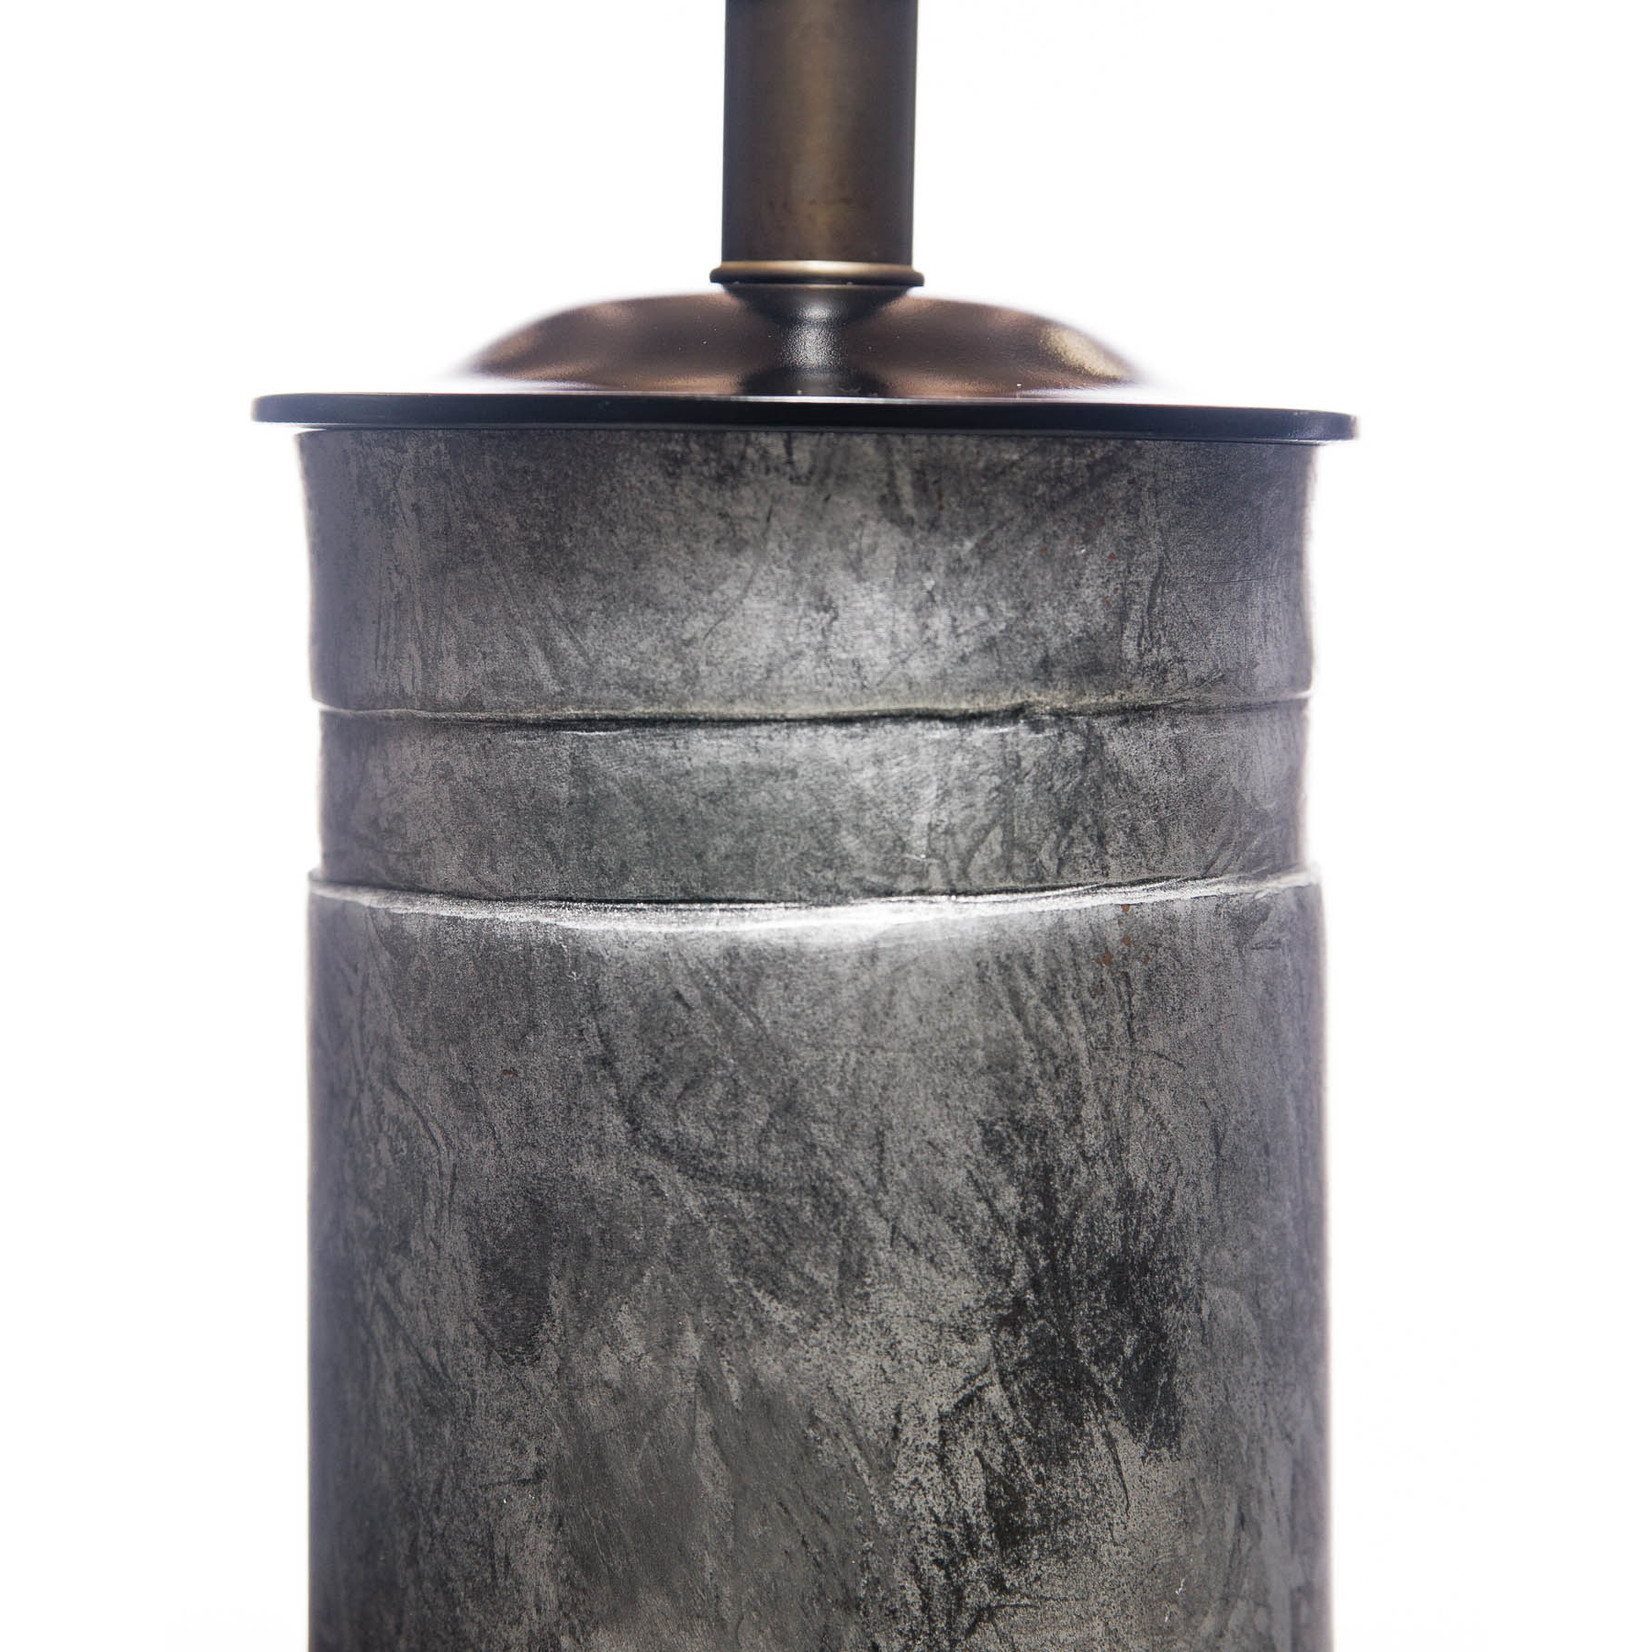 Lawrence & Scott Legacy Audra Verdigris Bronze Table Lamp in Weathered Patina